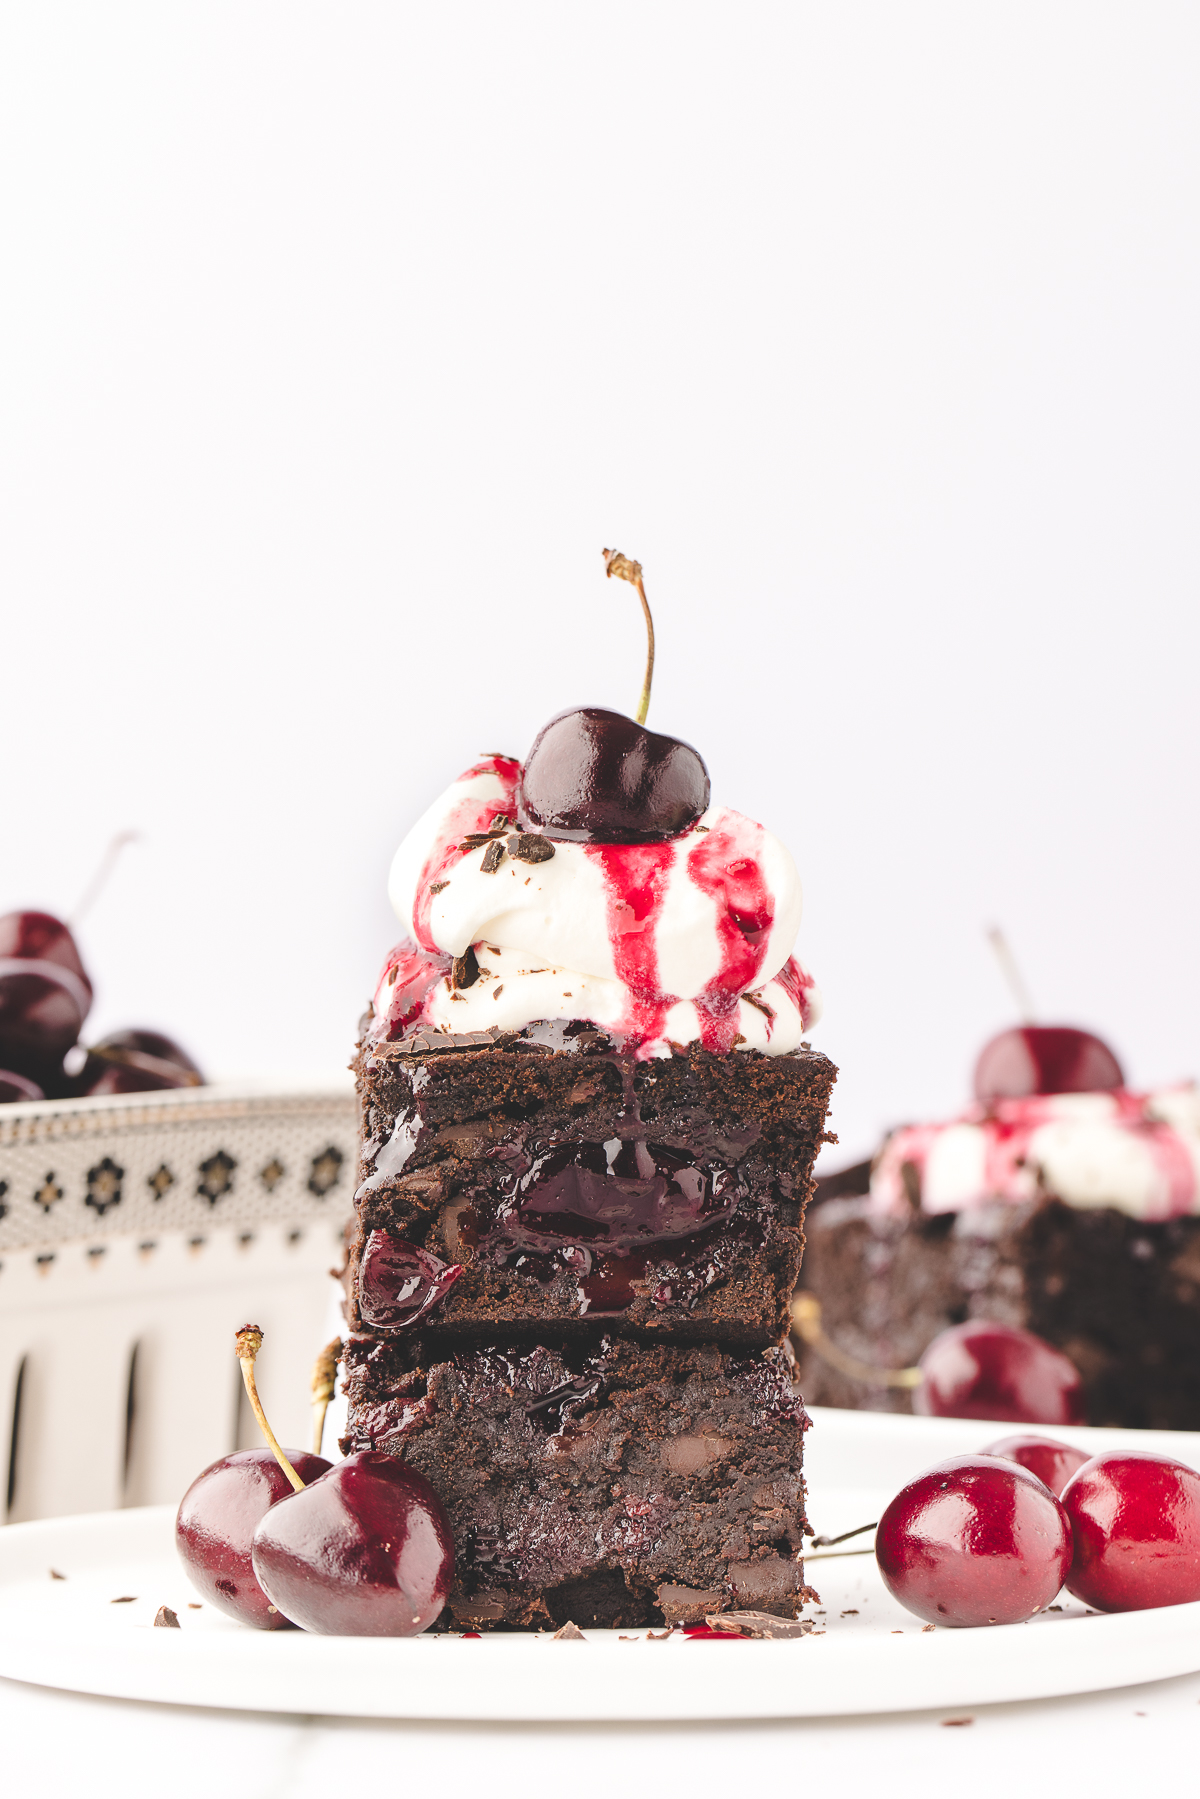 Black Forest Brownies Recipe. Brownies 2 of them stacked with whipped cream on top and a cherry. Brownies in background and cherries in a basket on the left